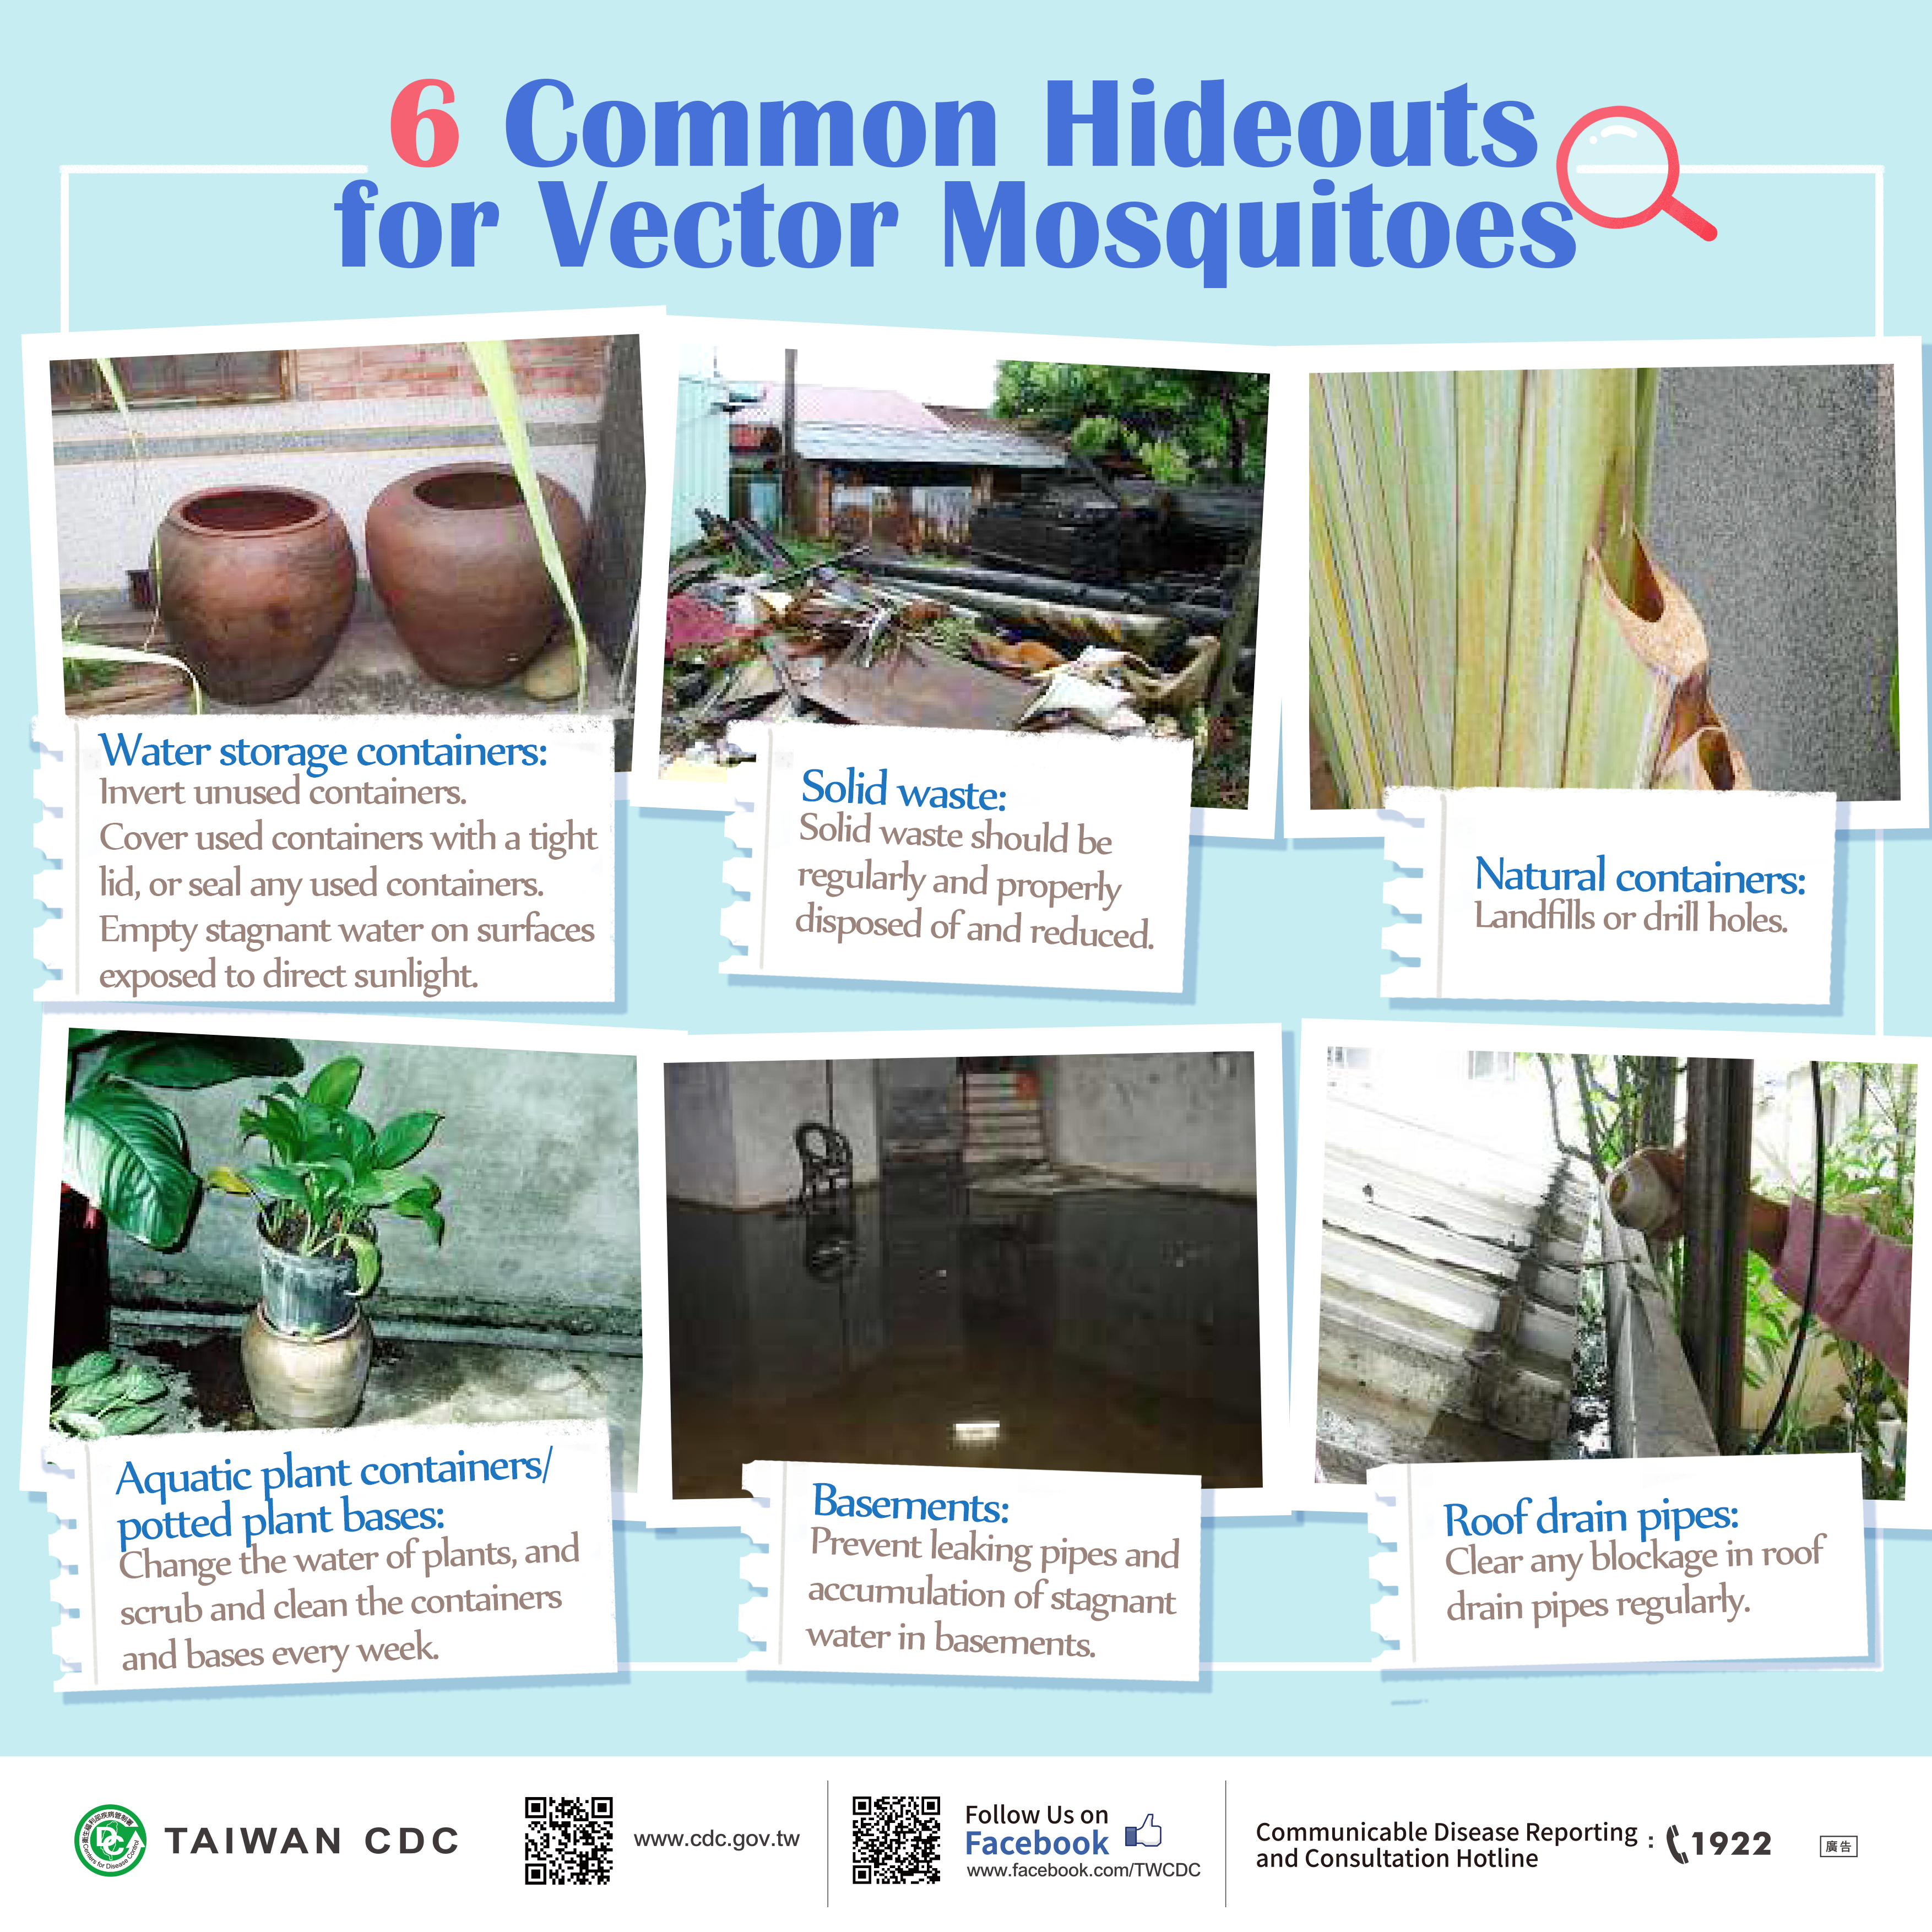 6 Common Hideouts for Vector Mosquitoes.png